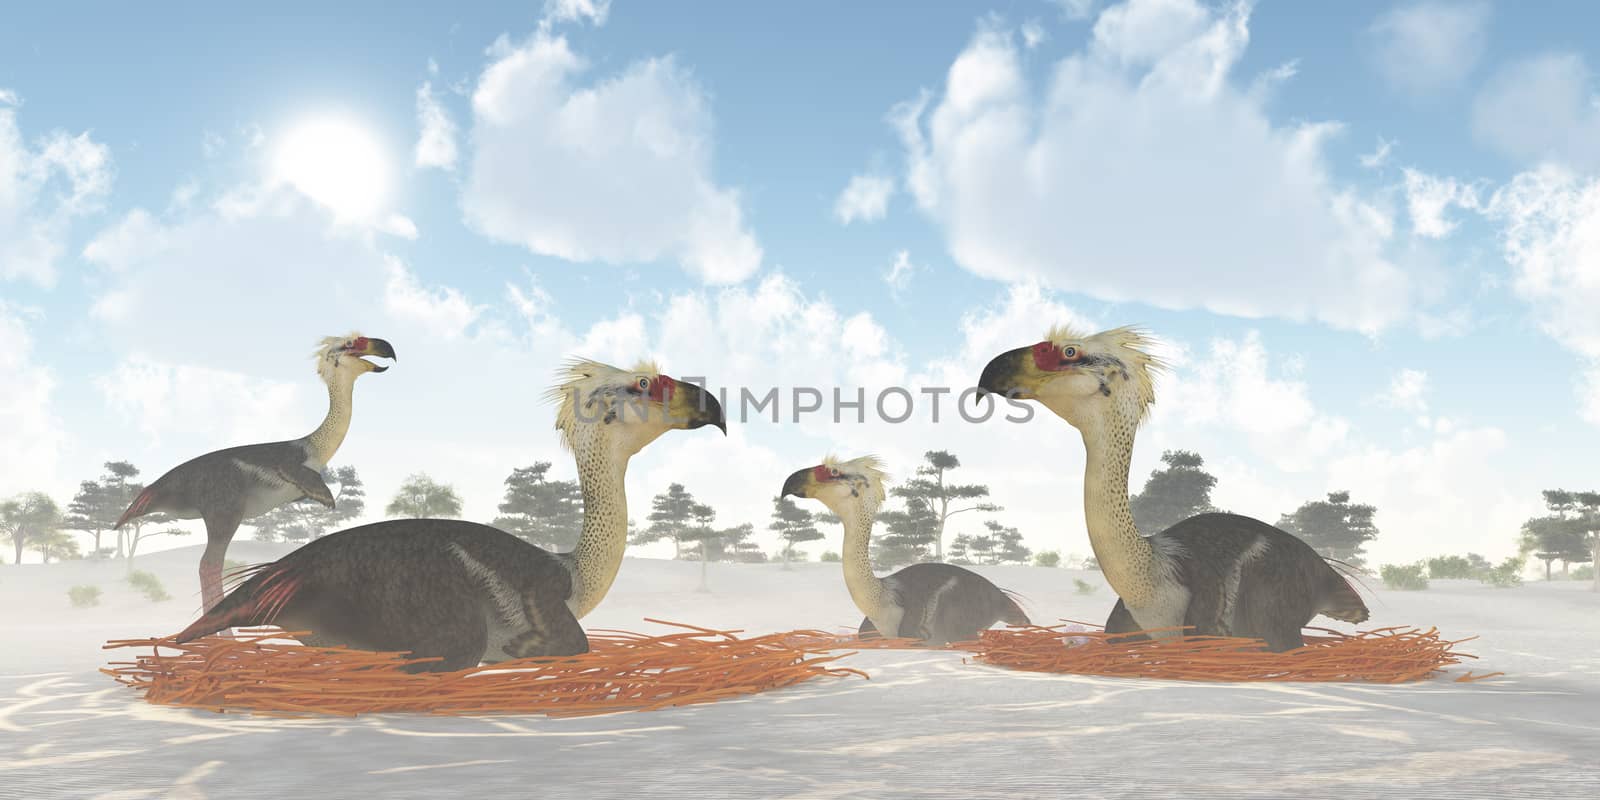 A male Phorusrhacos bird of prey watches over a colony of nesting females during the Miocene Era.